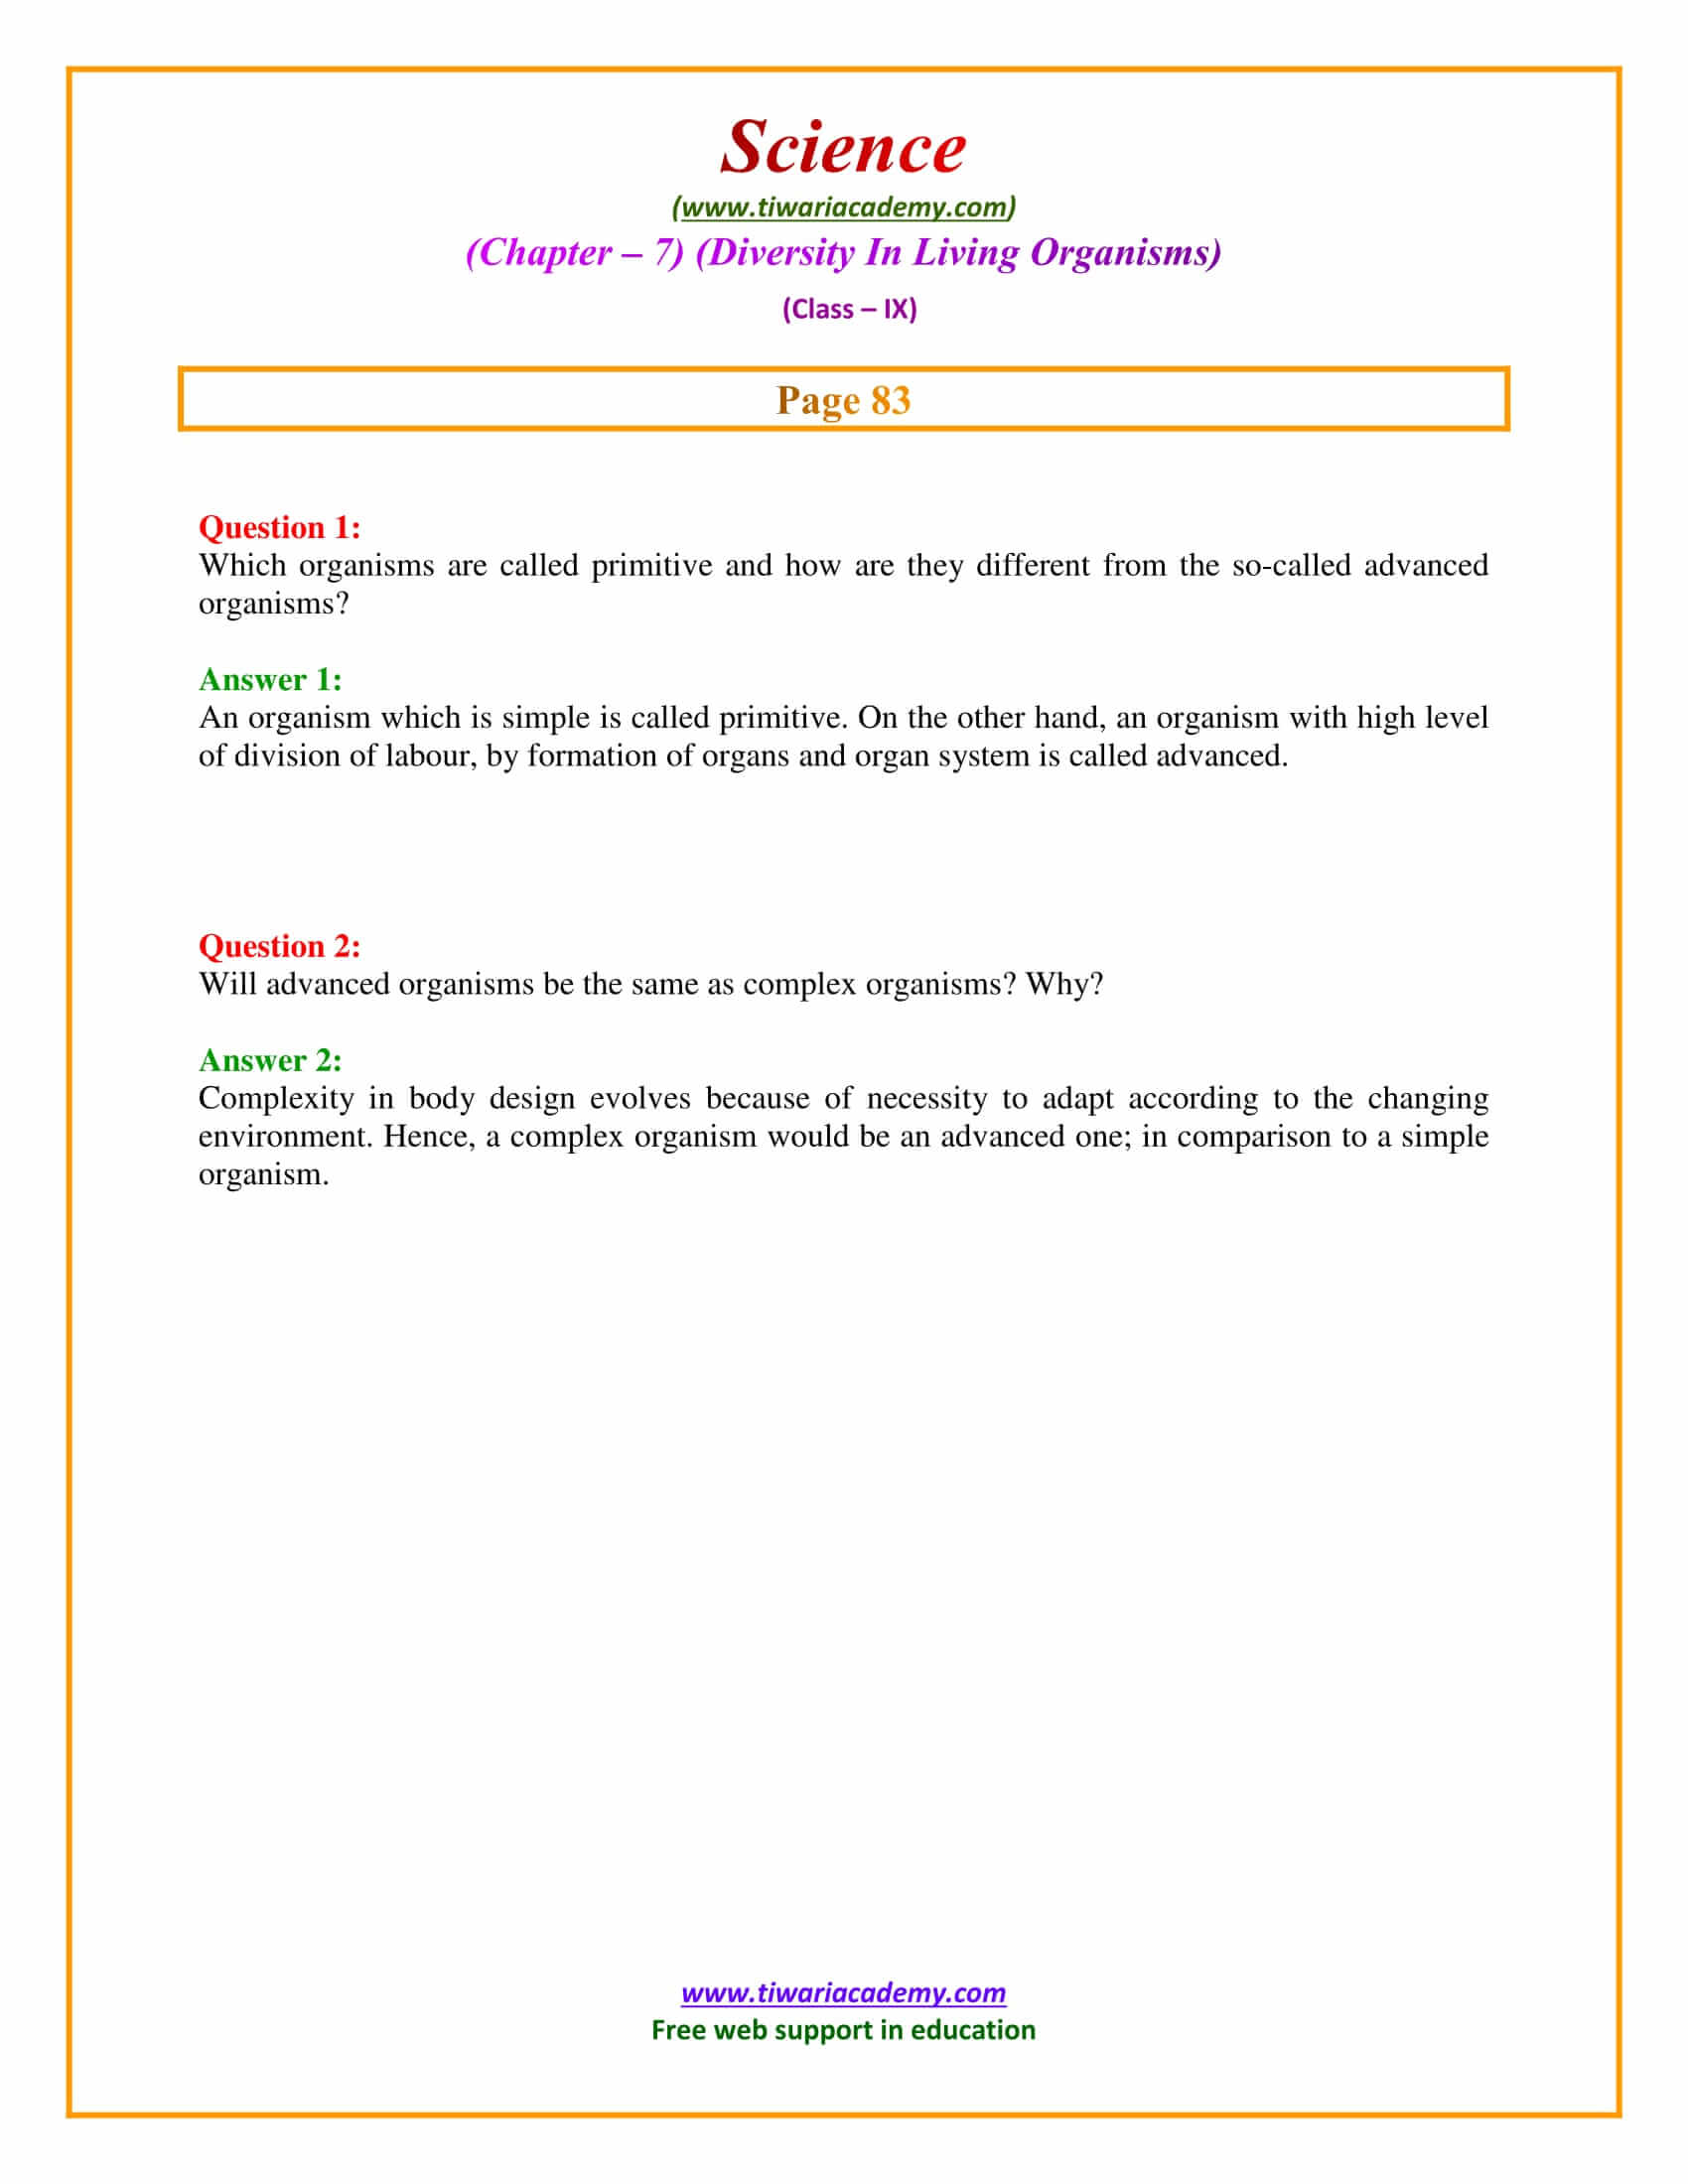 NCERT Solutions for Class 9 Science Chapter 7 Diversity in Living Organisms Intext questions page 83